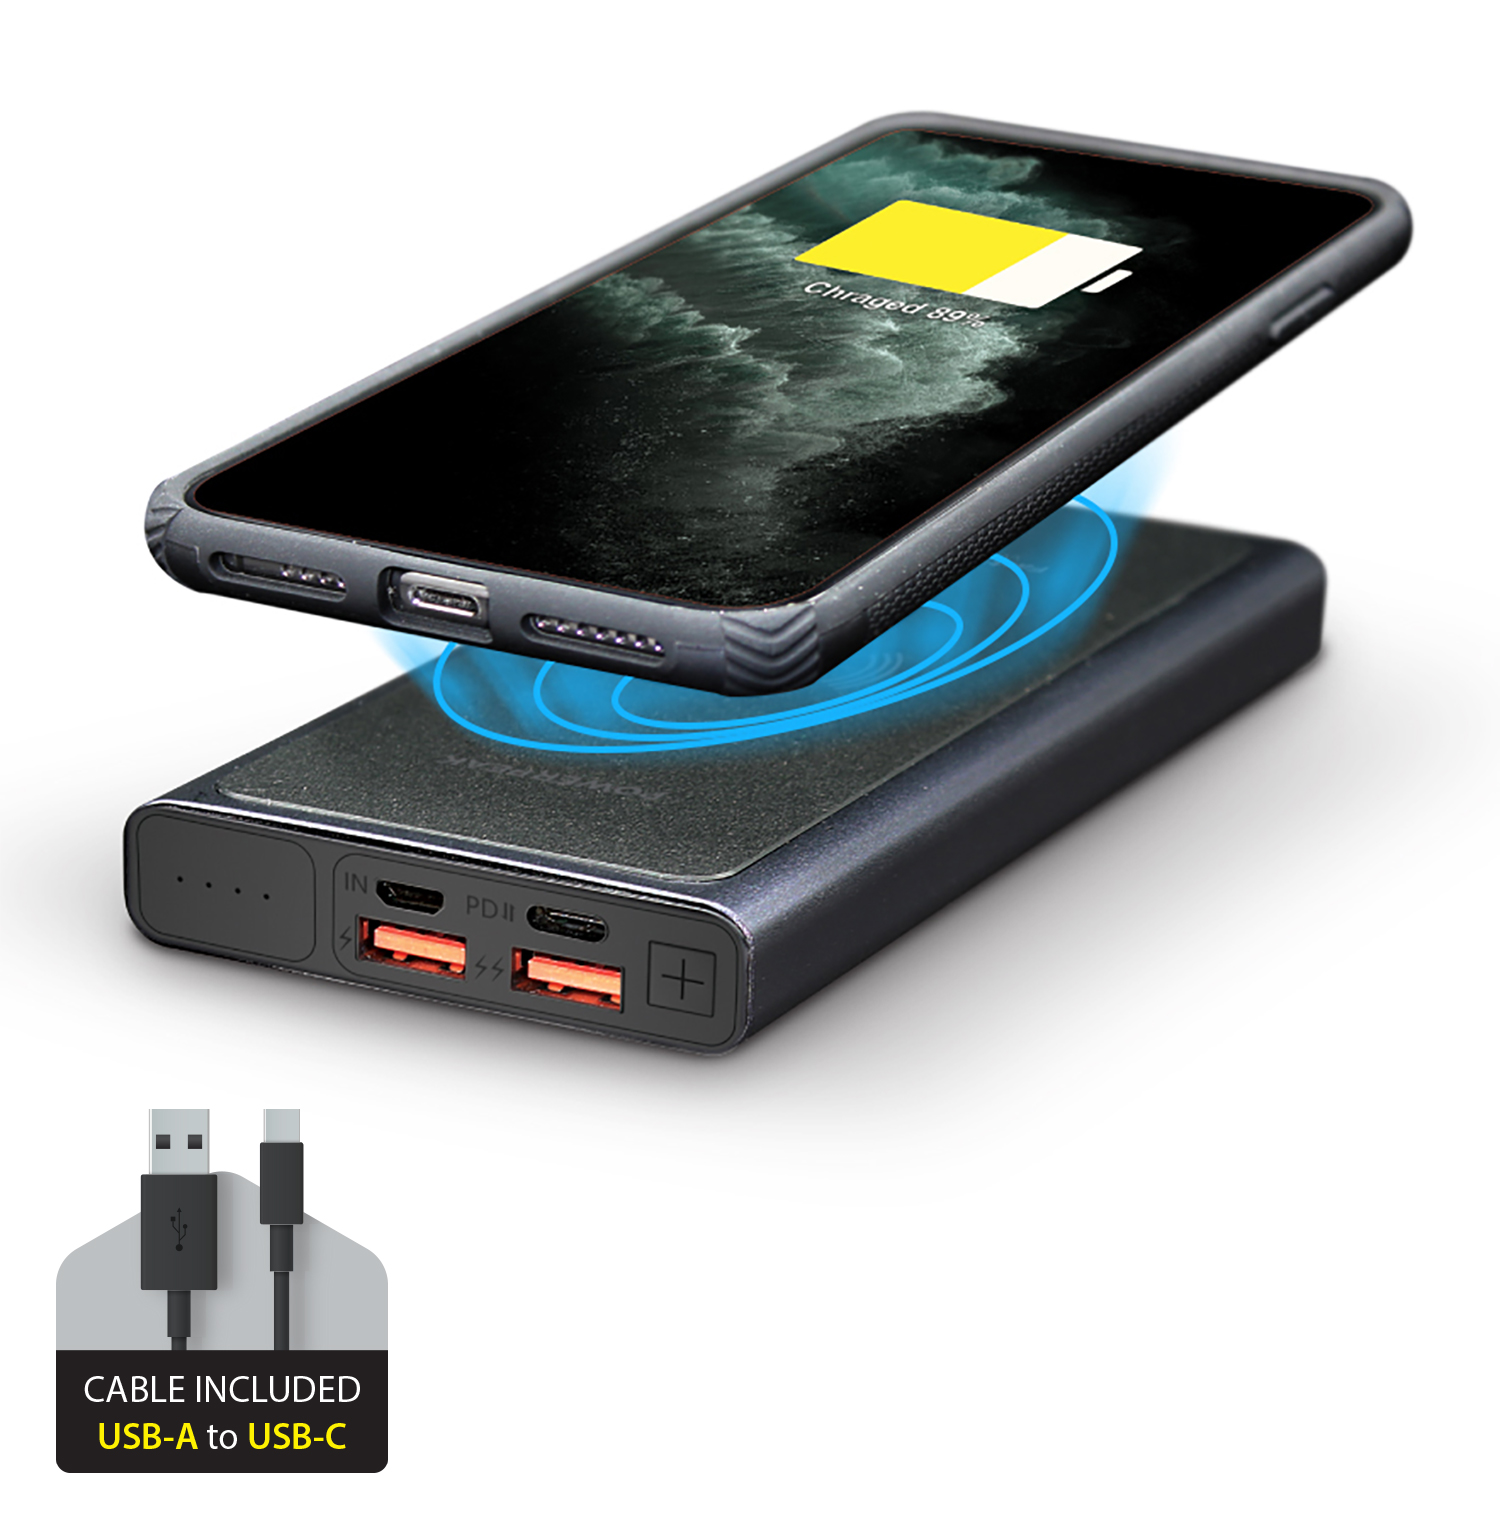 Power Peak mAh Wireless Charger and Battery Pack -